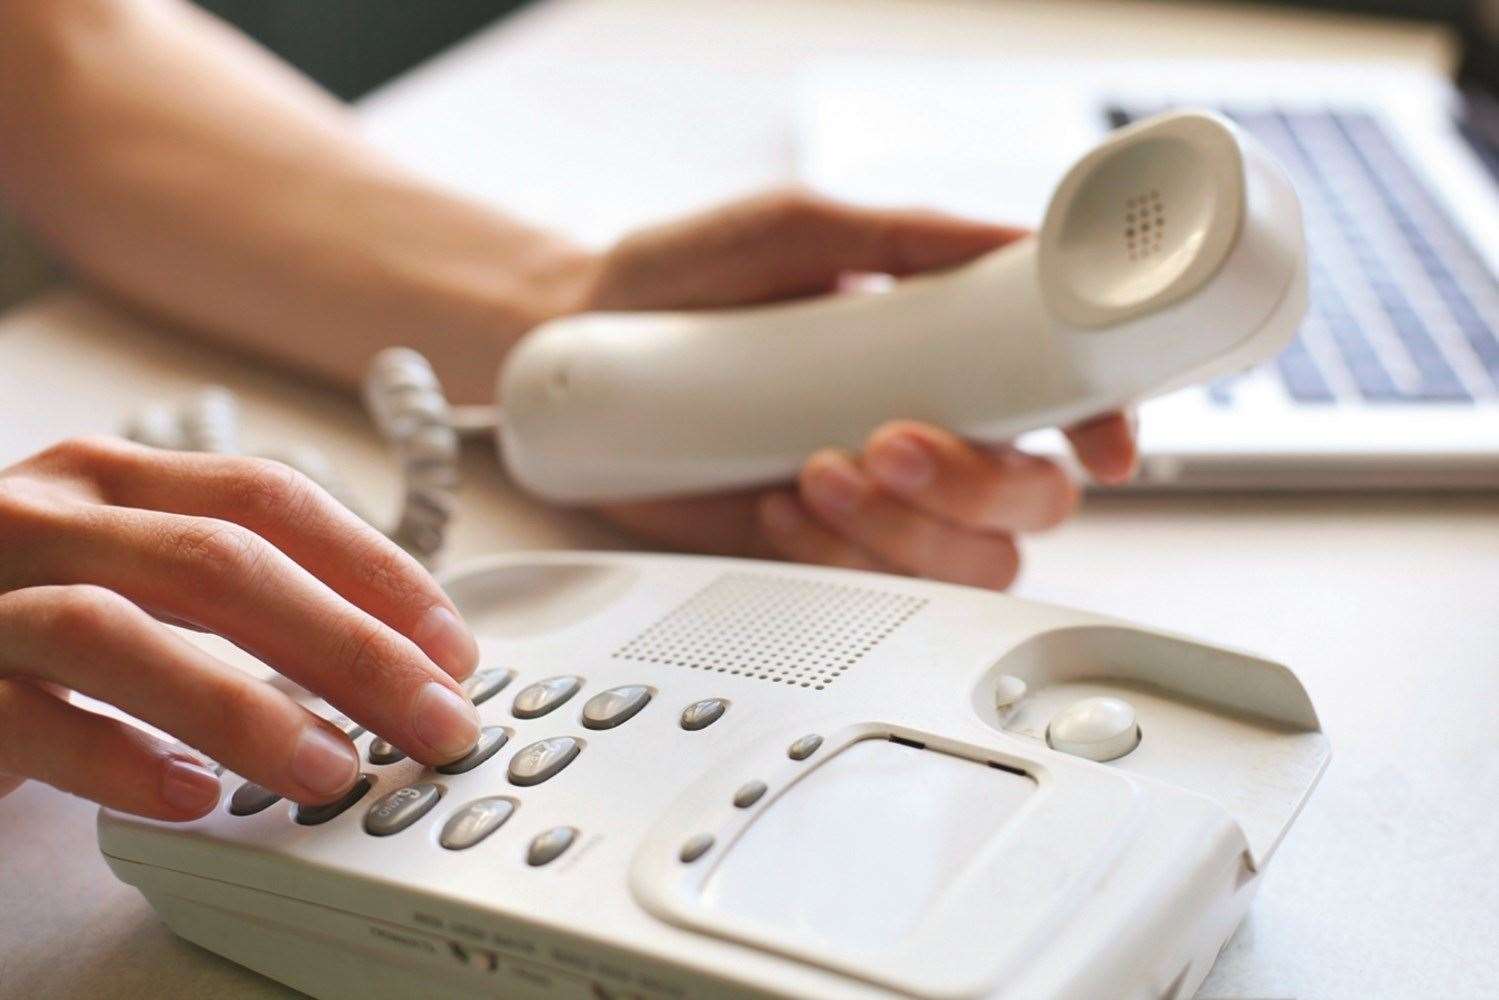 The callers put pressure on people over the phone. Stock photo